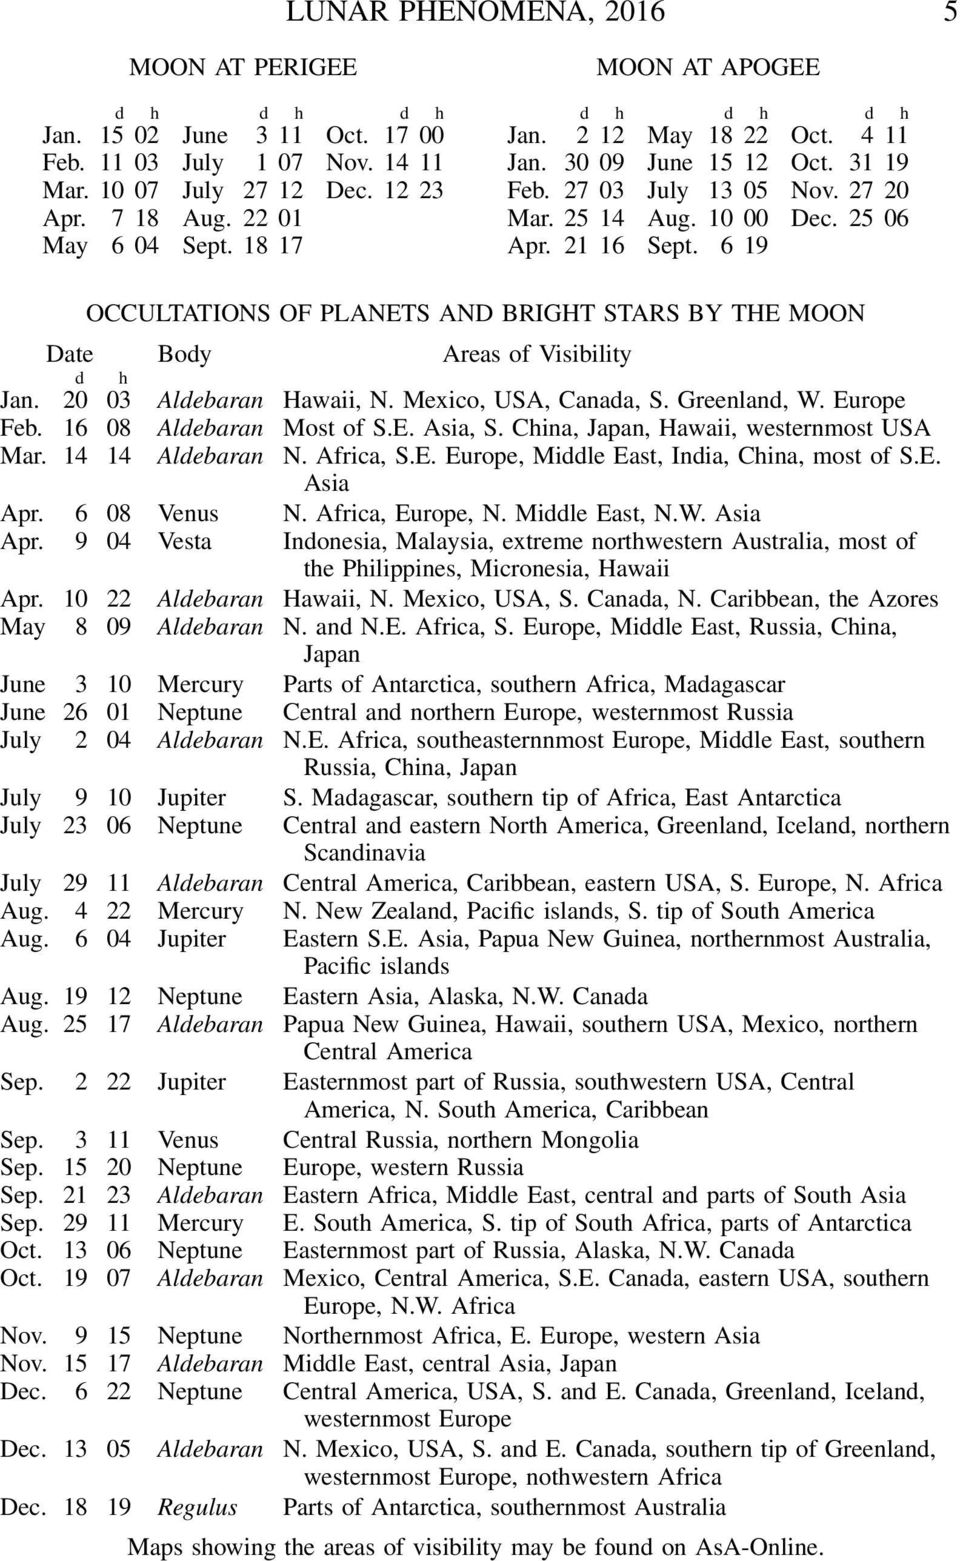 6 19 OCCULTATIONS OF PLANETS AND BRIGHT STARS BY THE MOON Date Body Areas of Visibility Jan. d h 20 03 Aldebaran Hawaii, N. Mexico, USA, Canada, S. Greenland, W. Europe Feb. 16 08 Aldebaran Most of S.